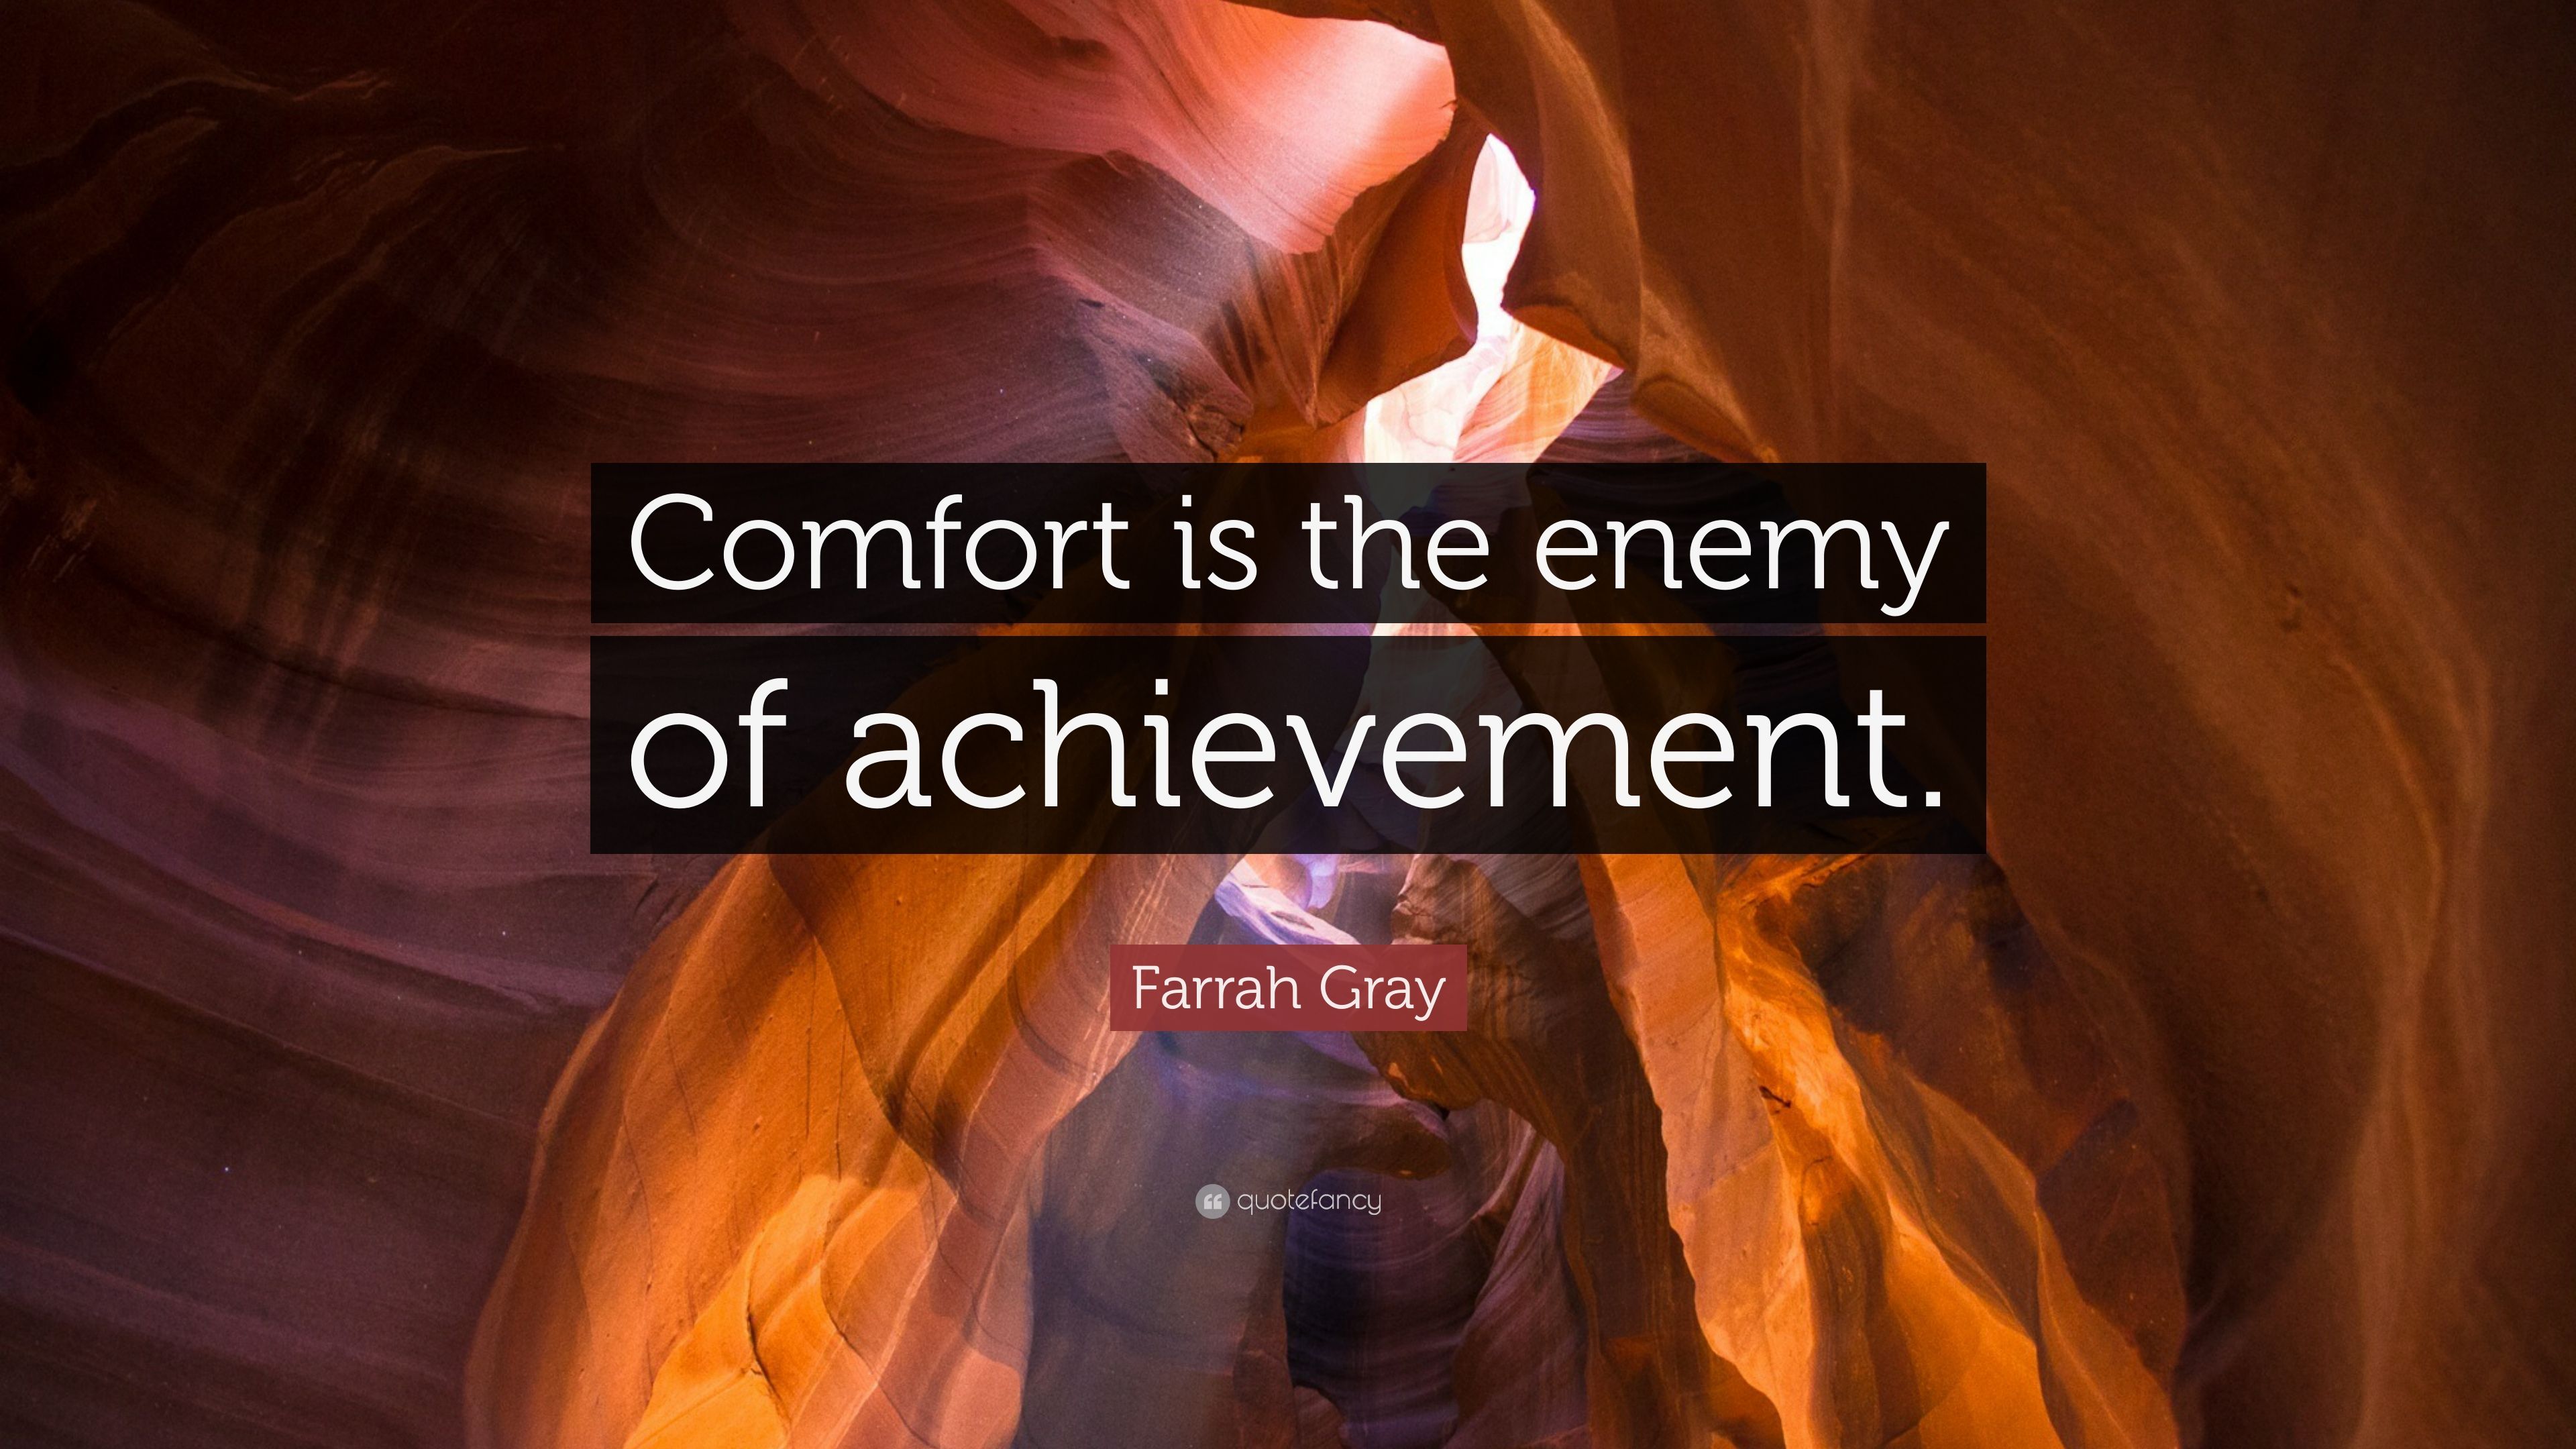 Farrah Gray Quote: “Comfort is the enemy of achievement.” 12